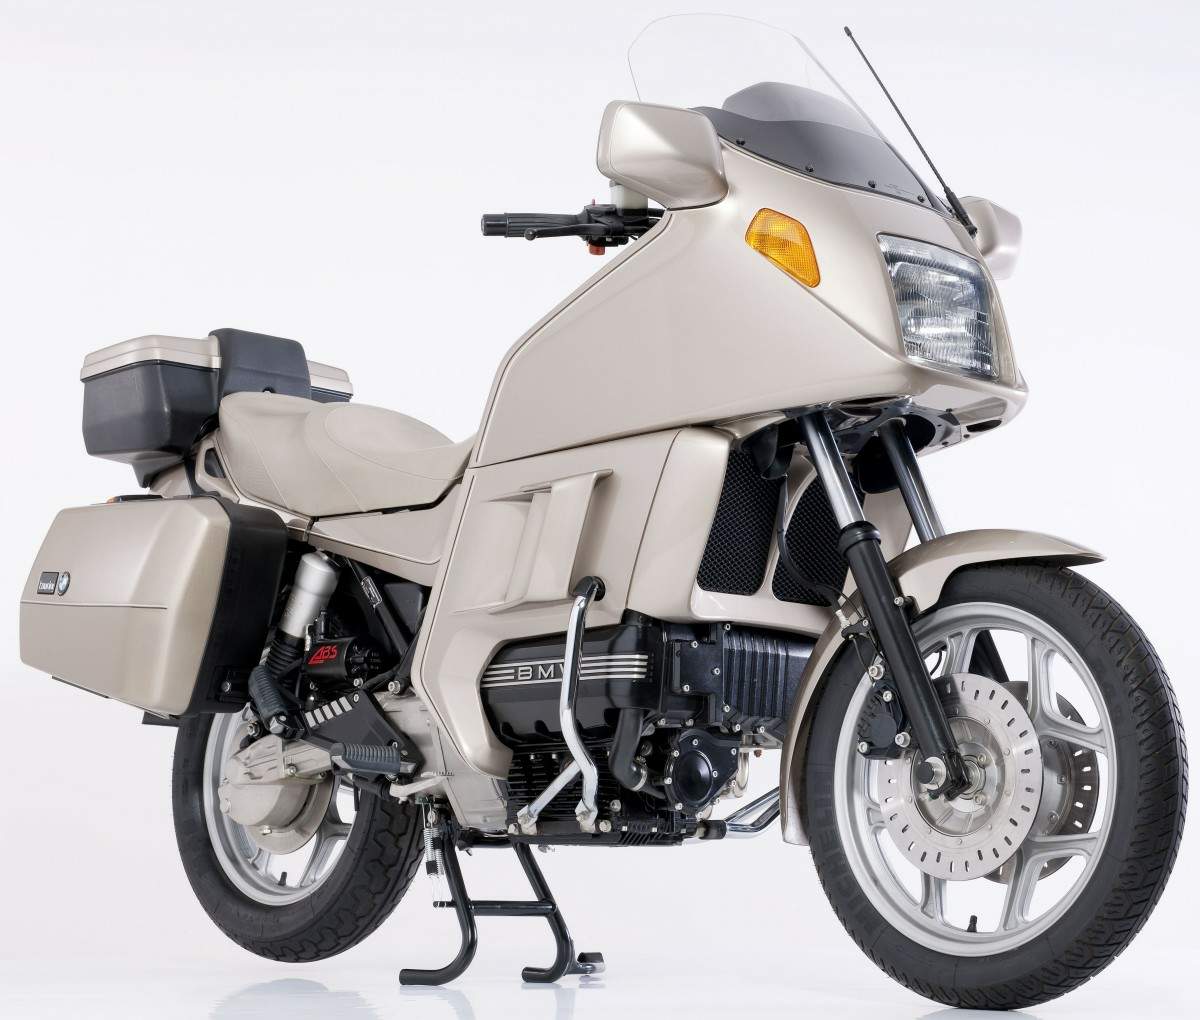 5 Minute Histories: The Story of the BMW K100 - A Free Guide